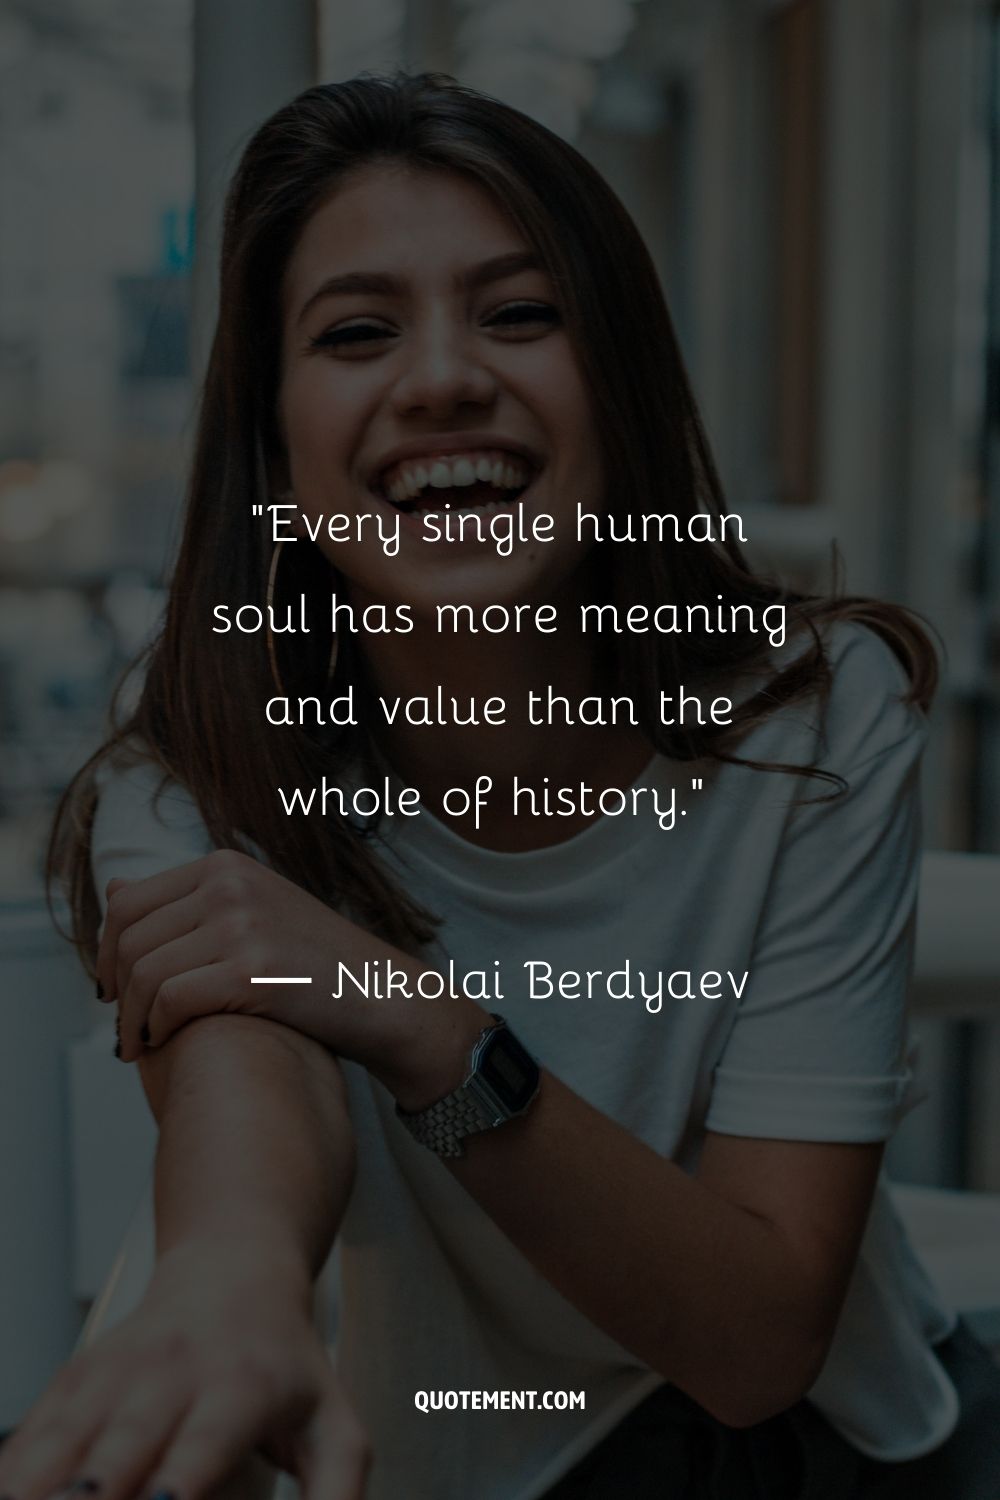 Every single human soul has more meaning and value than the whole of history